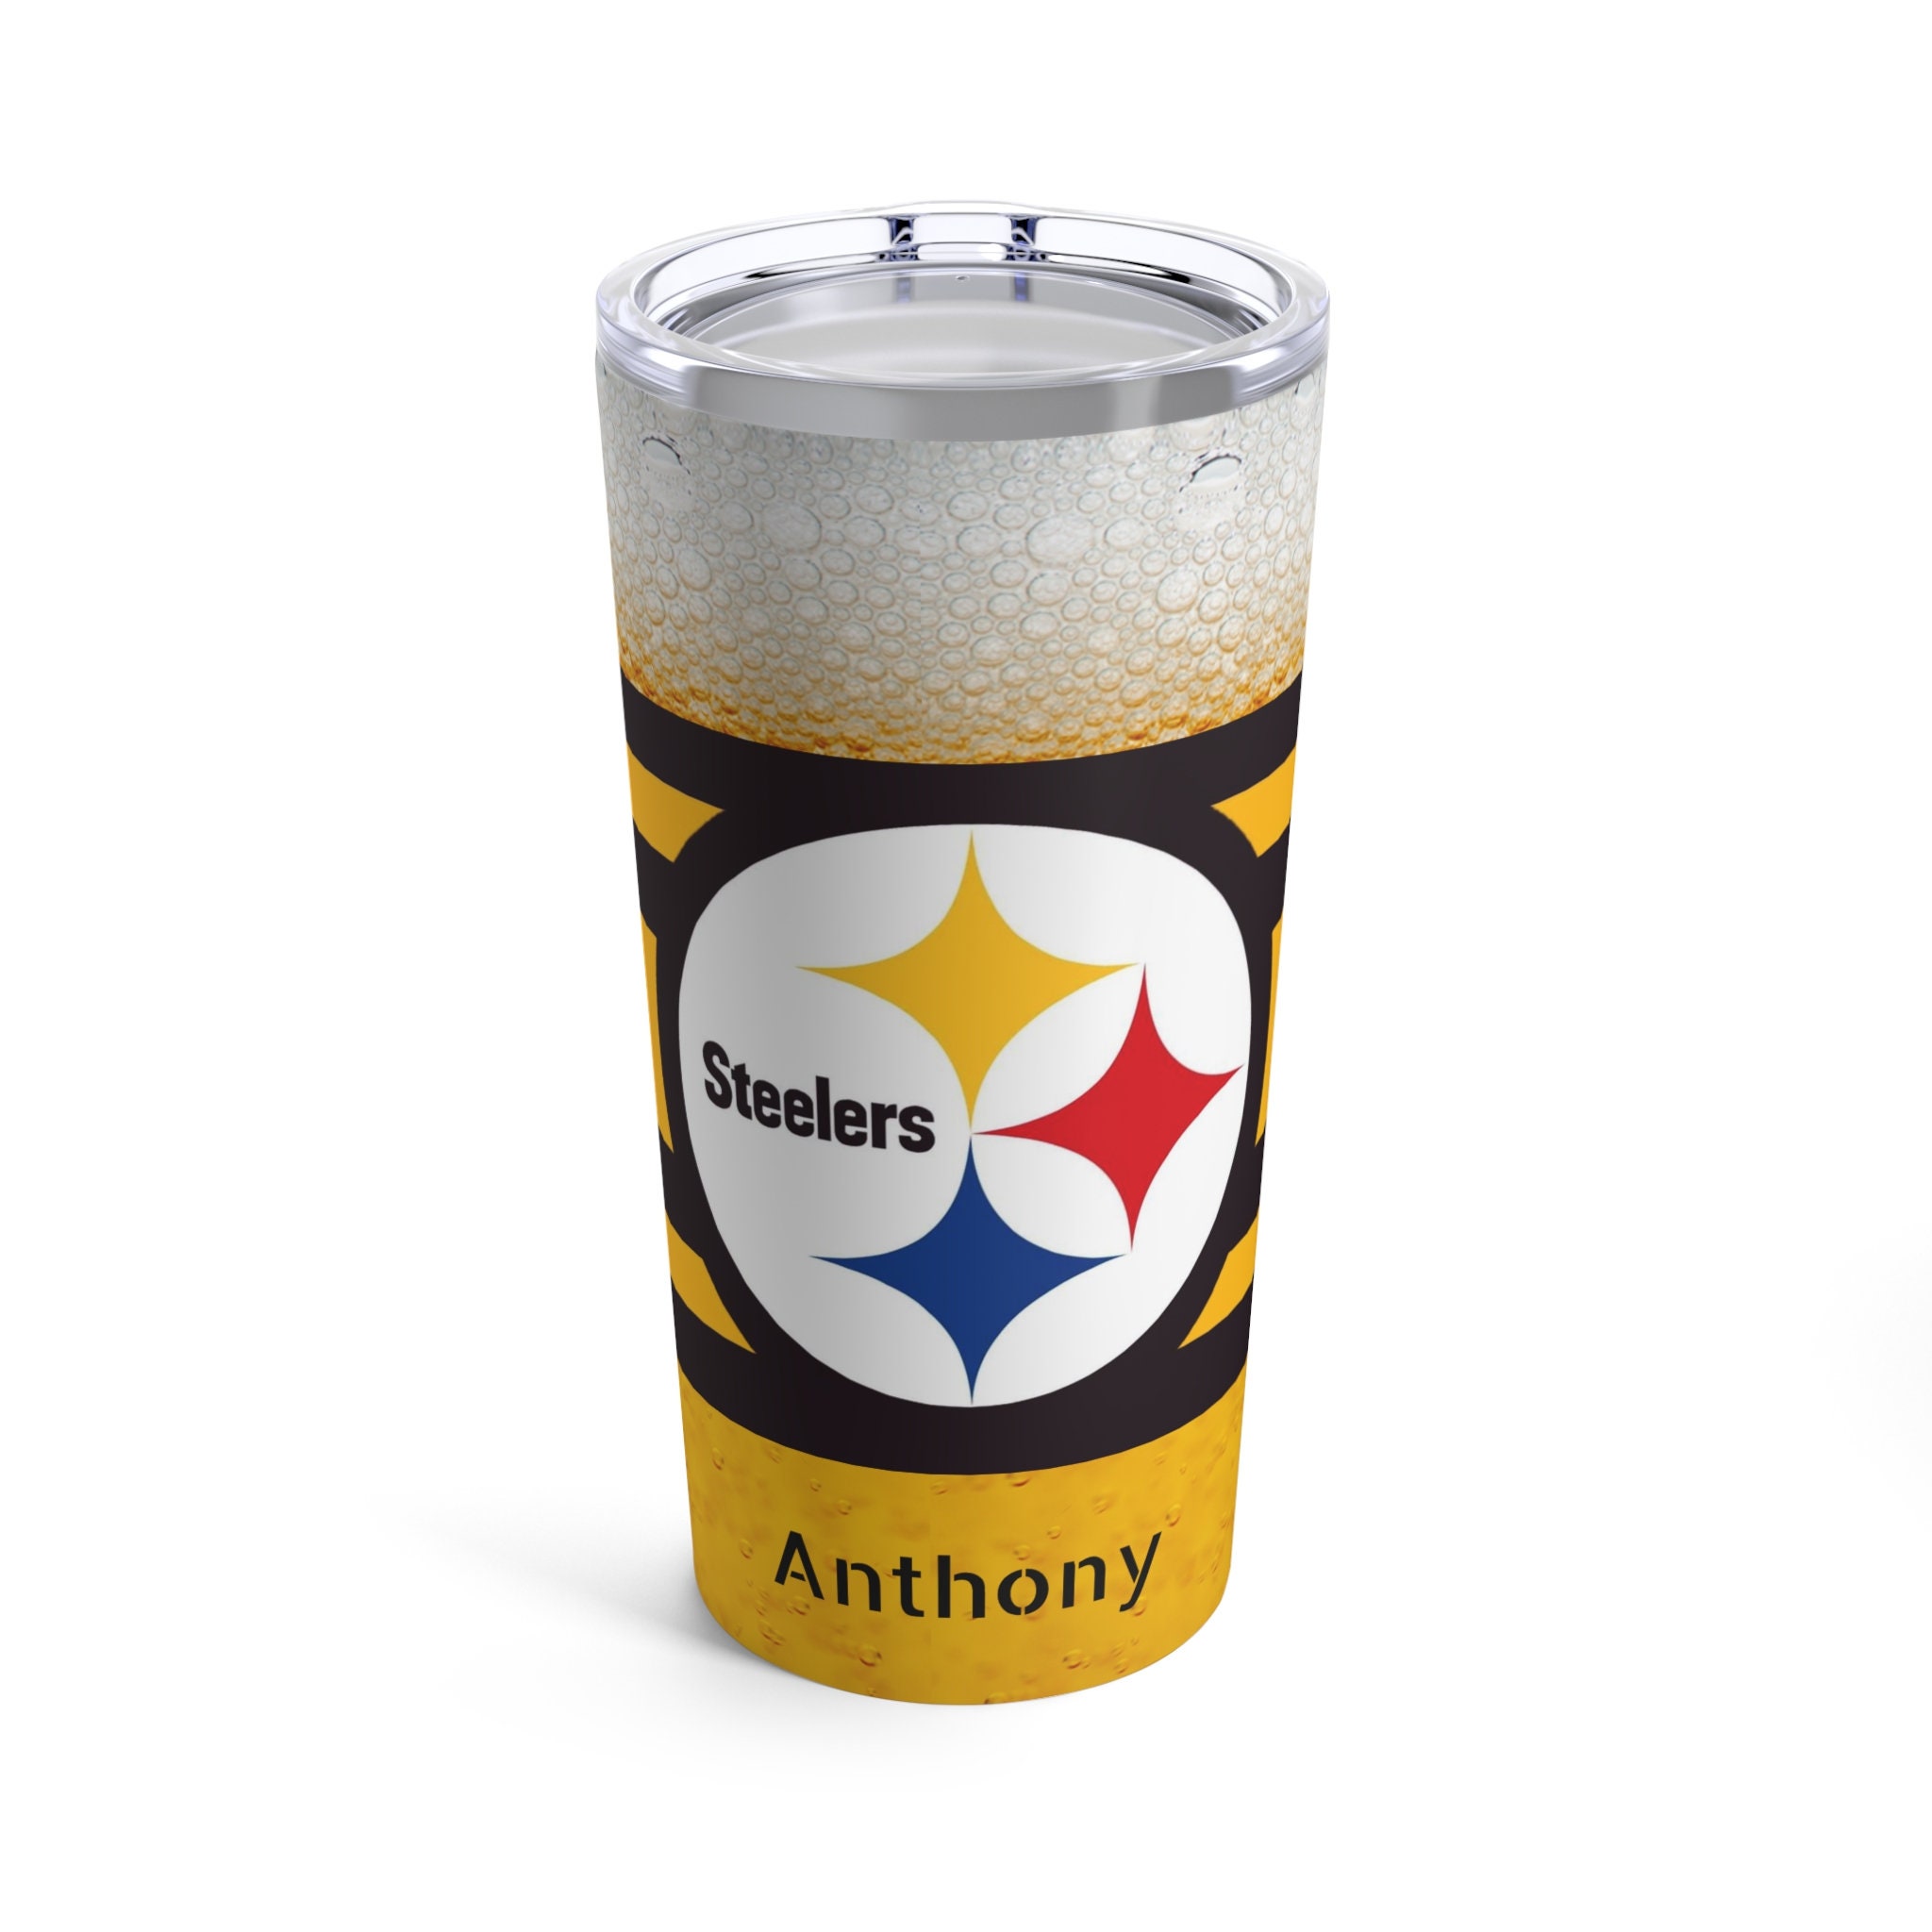 Tervis Made in USA Double Walled NFL® Pittsburgh Steelers  Insulated Tumbler Cup Keeps Drinks Cold & Hot, 16oz Mug, Tradition: Tumblers  & Water Glasses